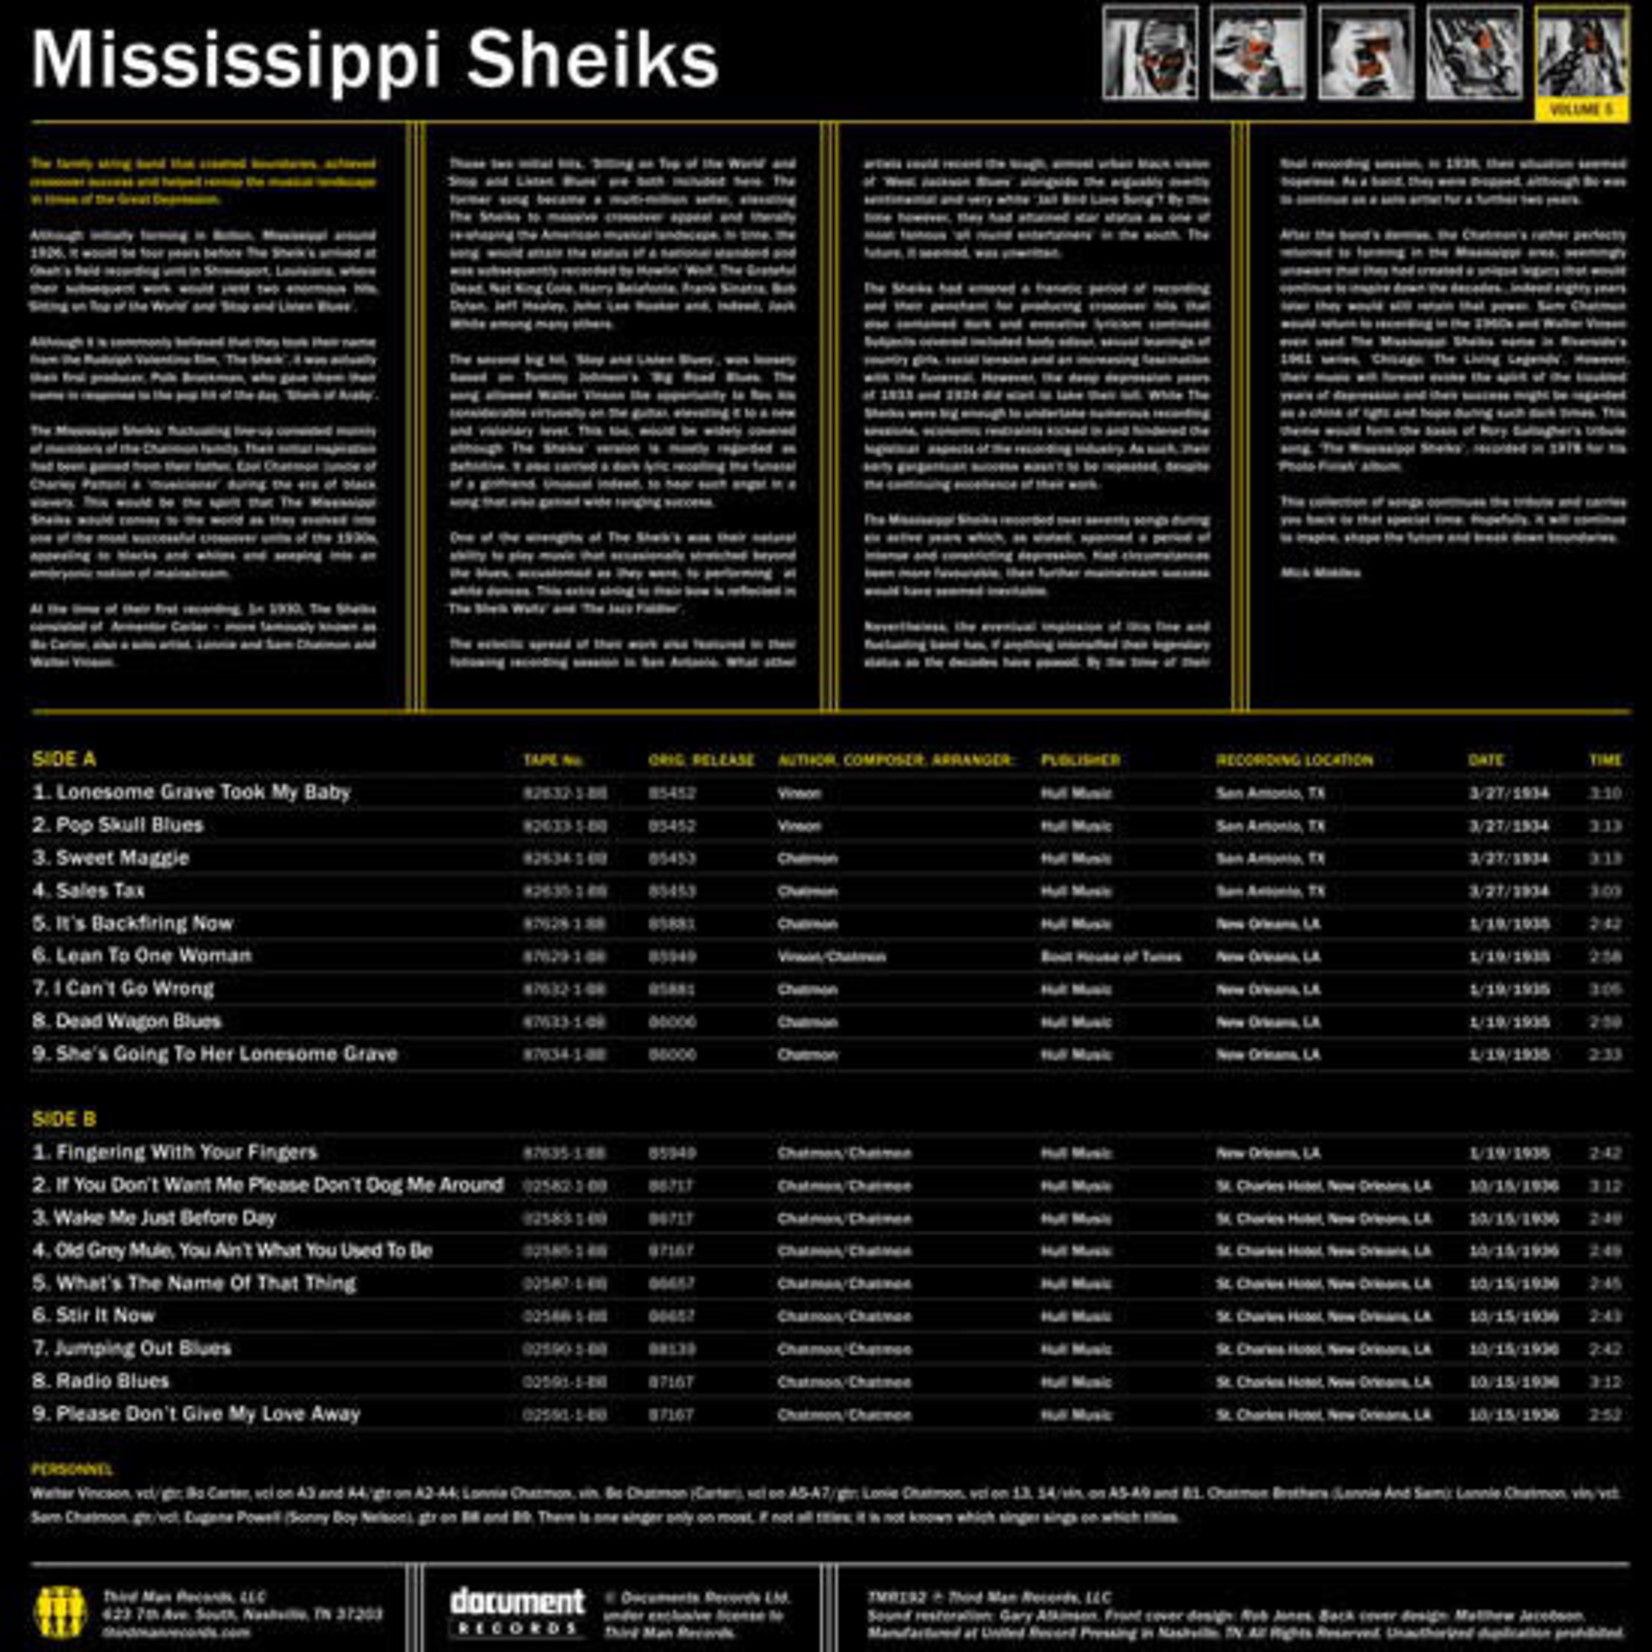 Third Man Mississippi Sheiks - Complete Recorded Works, Vol 5 (LP)